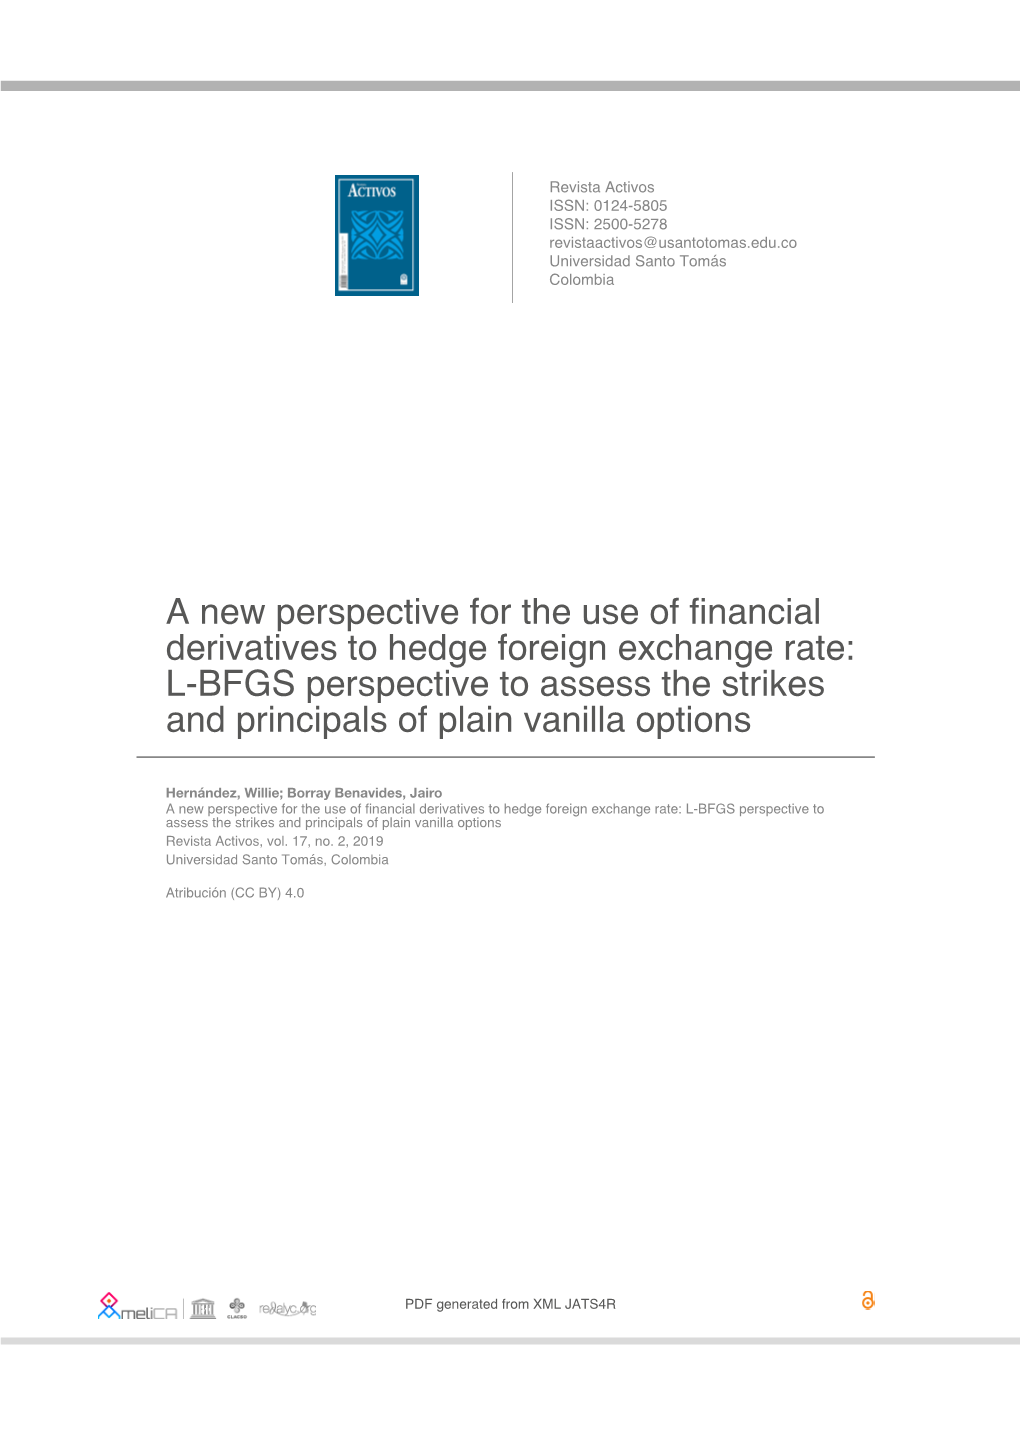 A New Perspective for the Use of Financial Derivatives to Hedge Foreign Exchange Rate